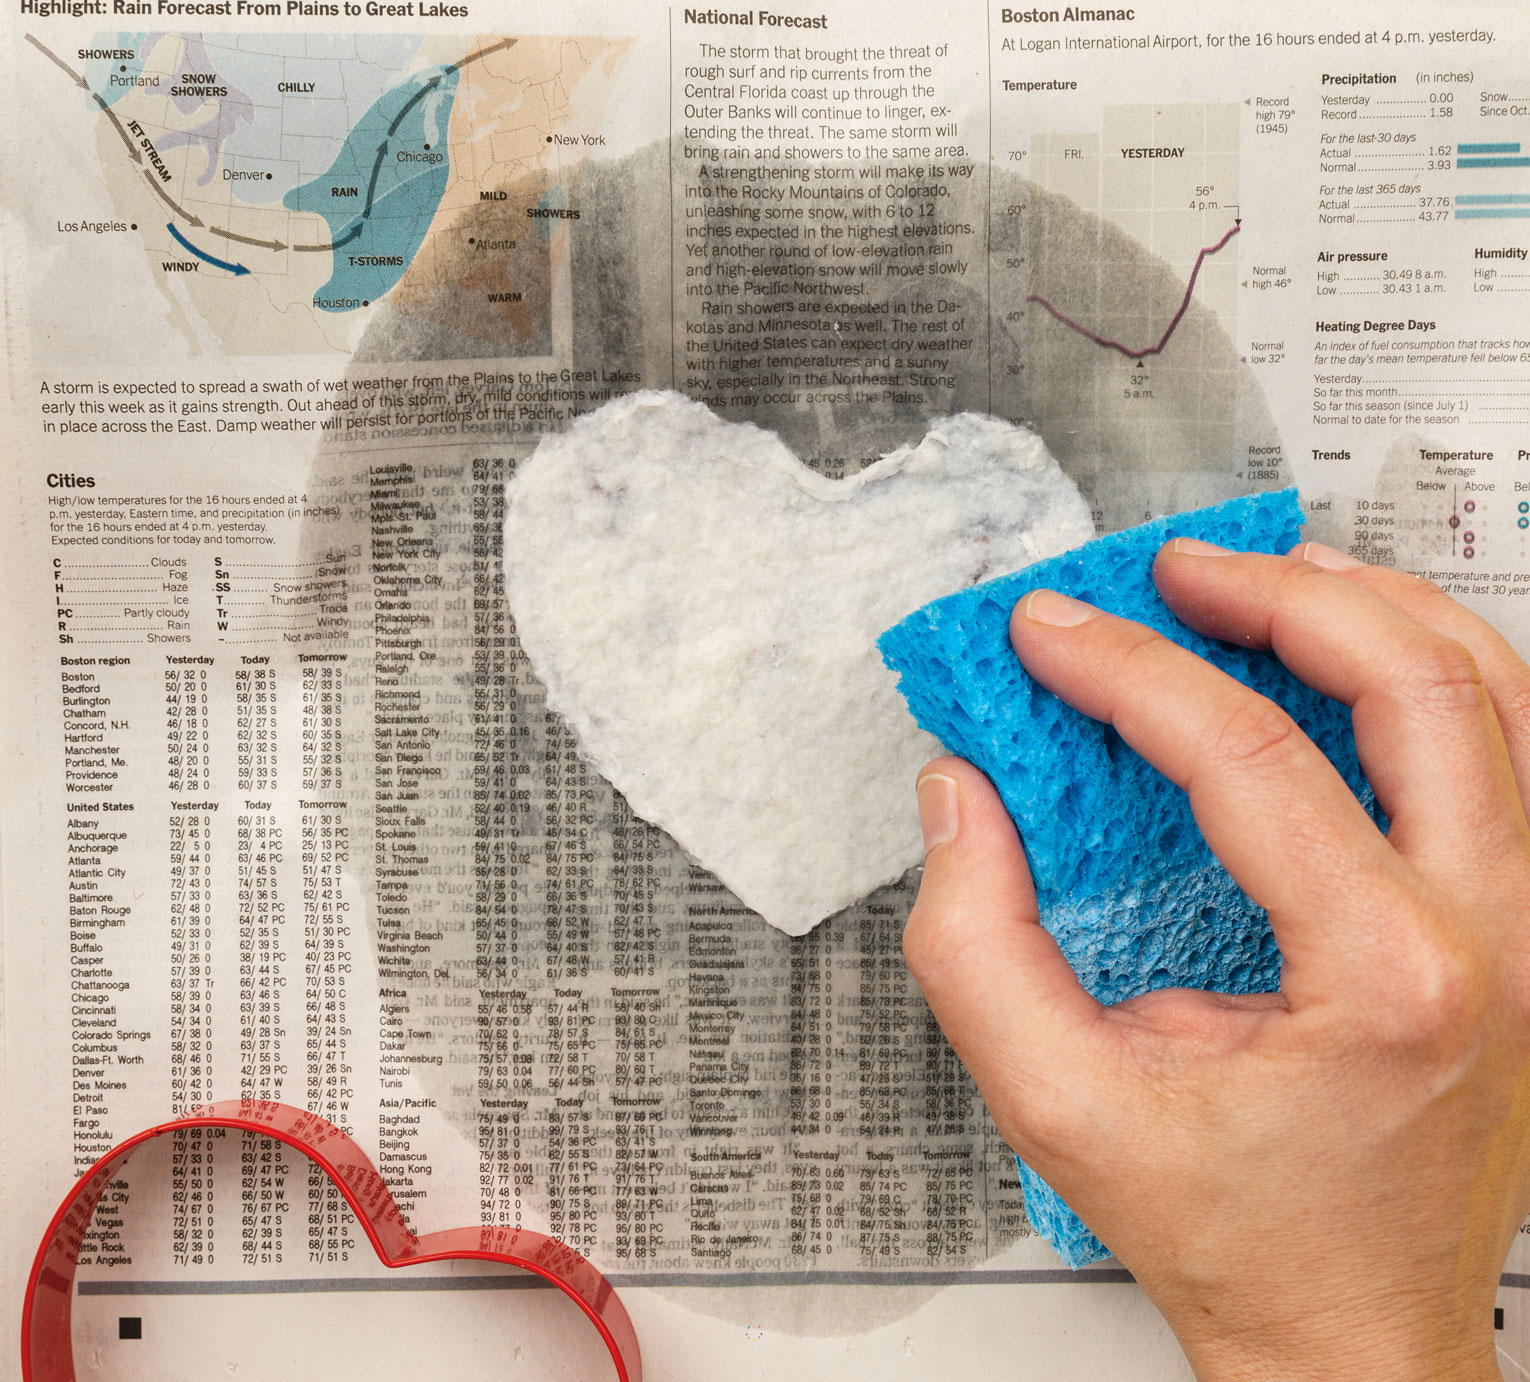 Photo of hand using sponge to press water out of heart-shaped plantable paper.